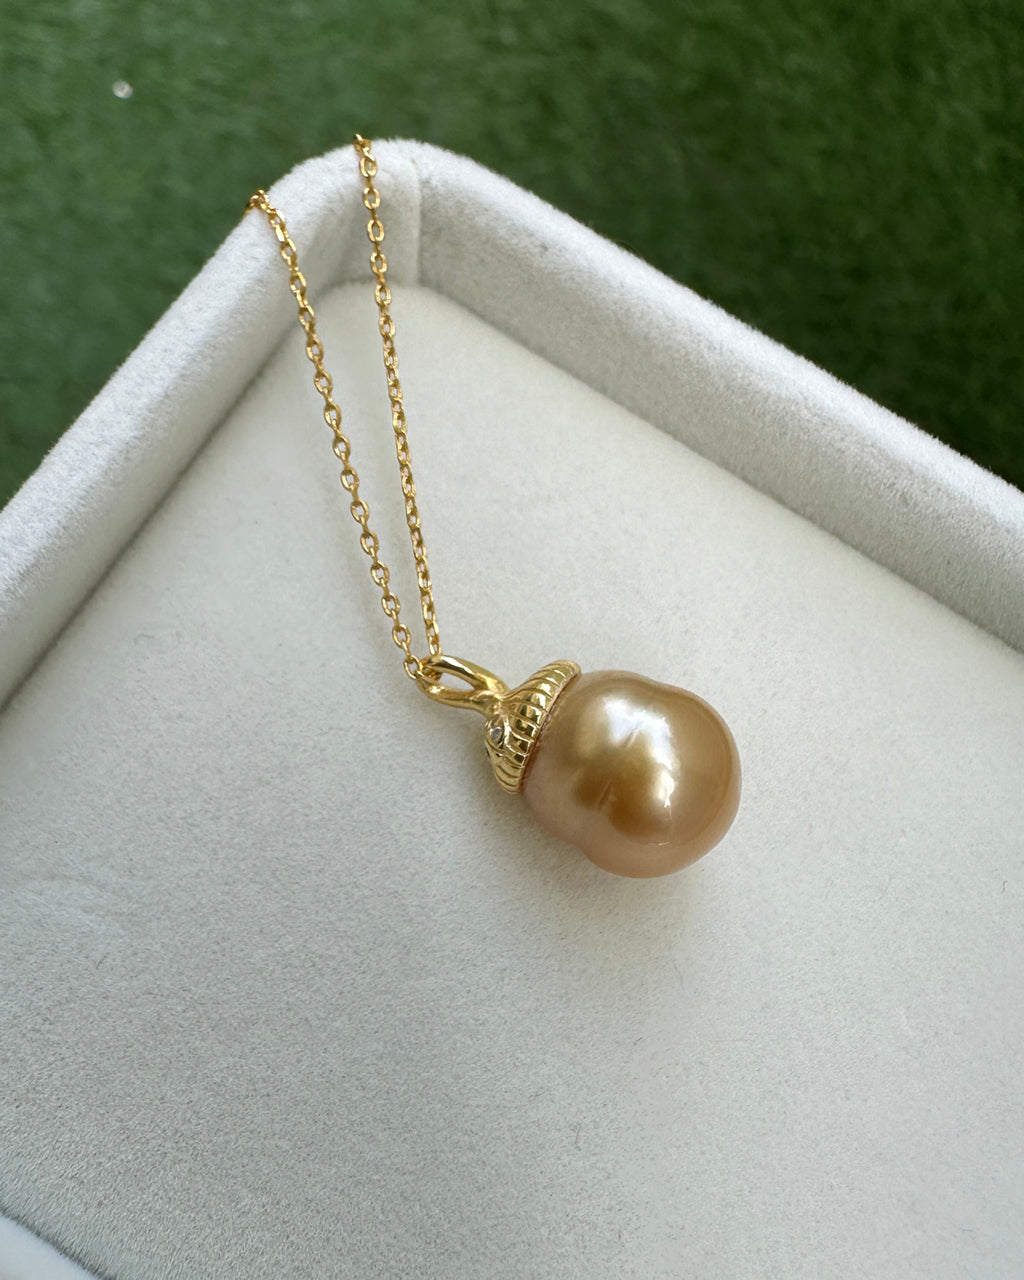 South Sea Pearl Pendant Necklace - 11mm+ Acorn Nut Cute Pearl Jewelry 